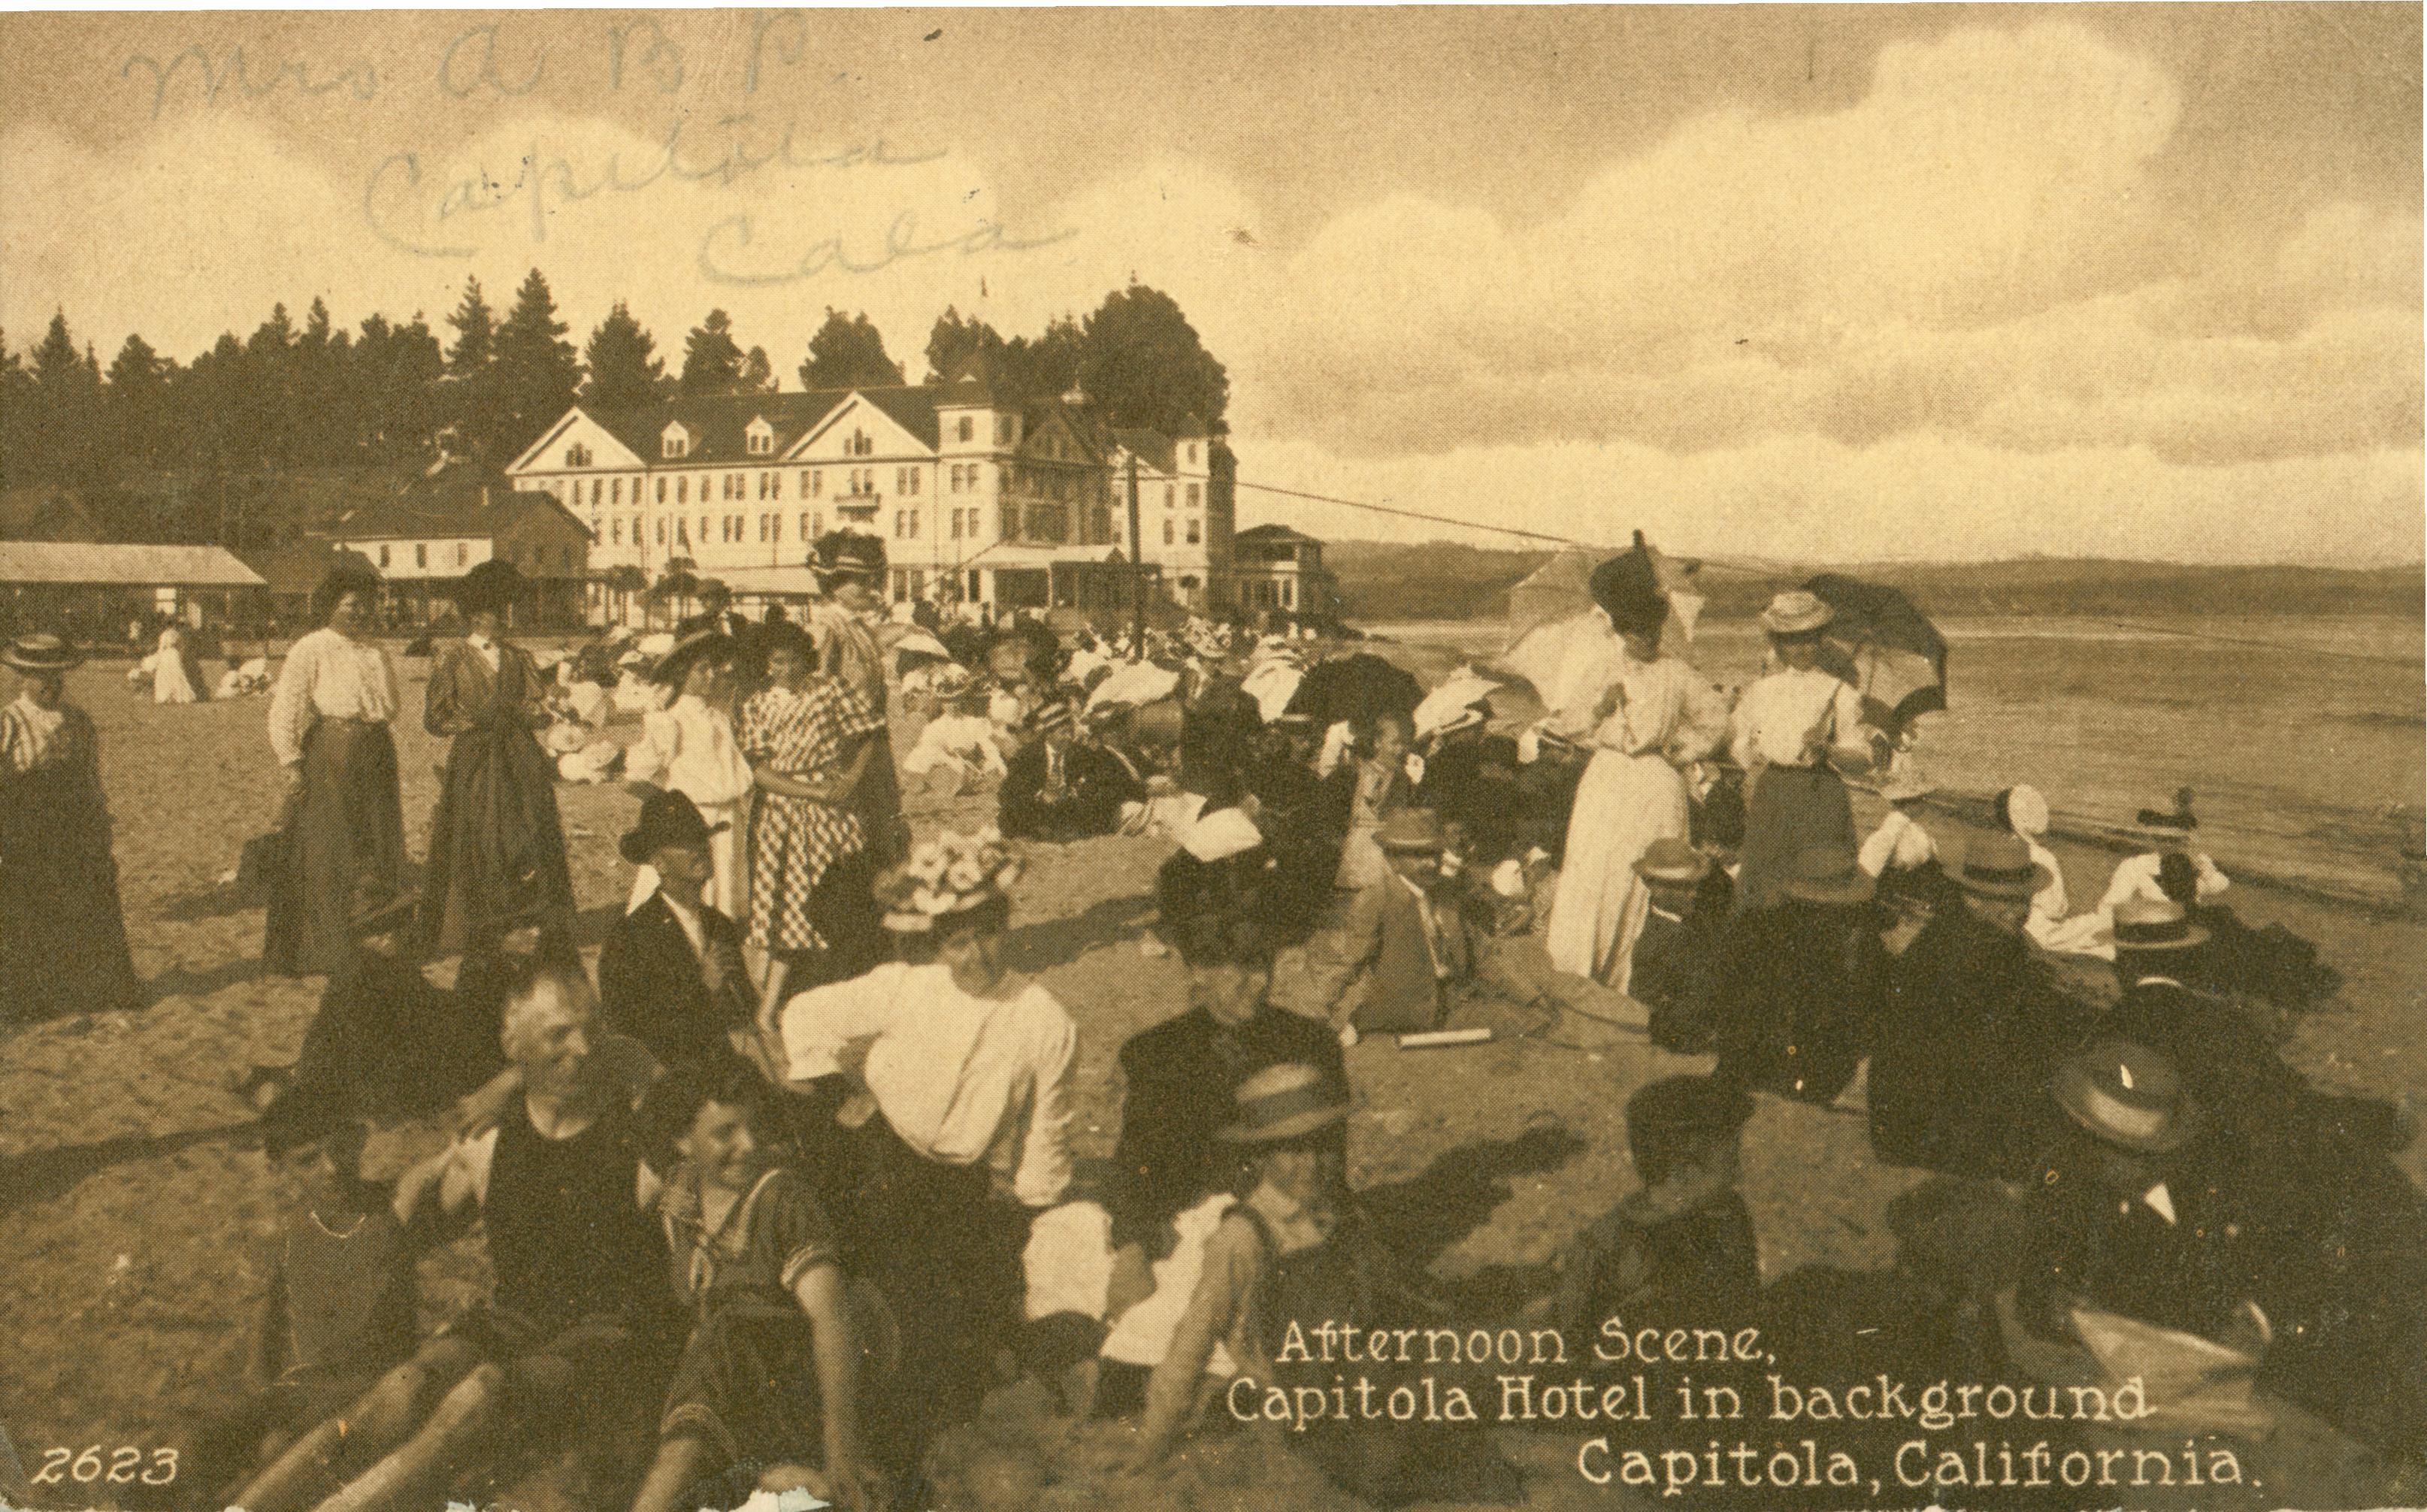 View of people sitting on the beach in front of hotel, exterior view of buildings in background,